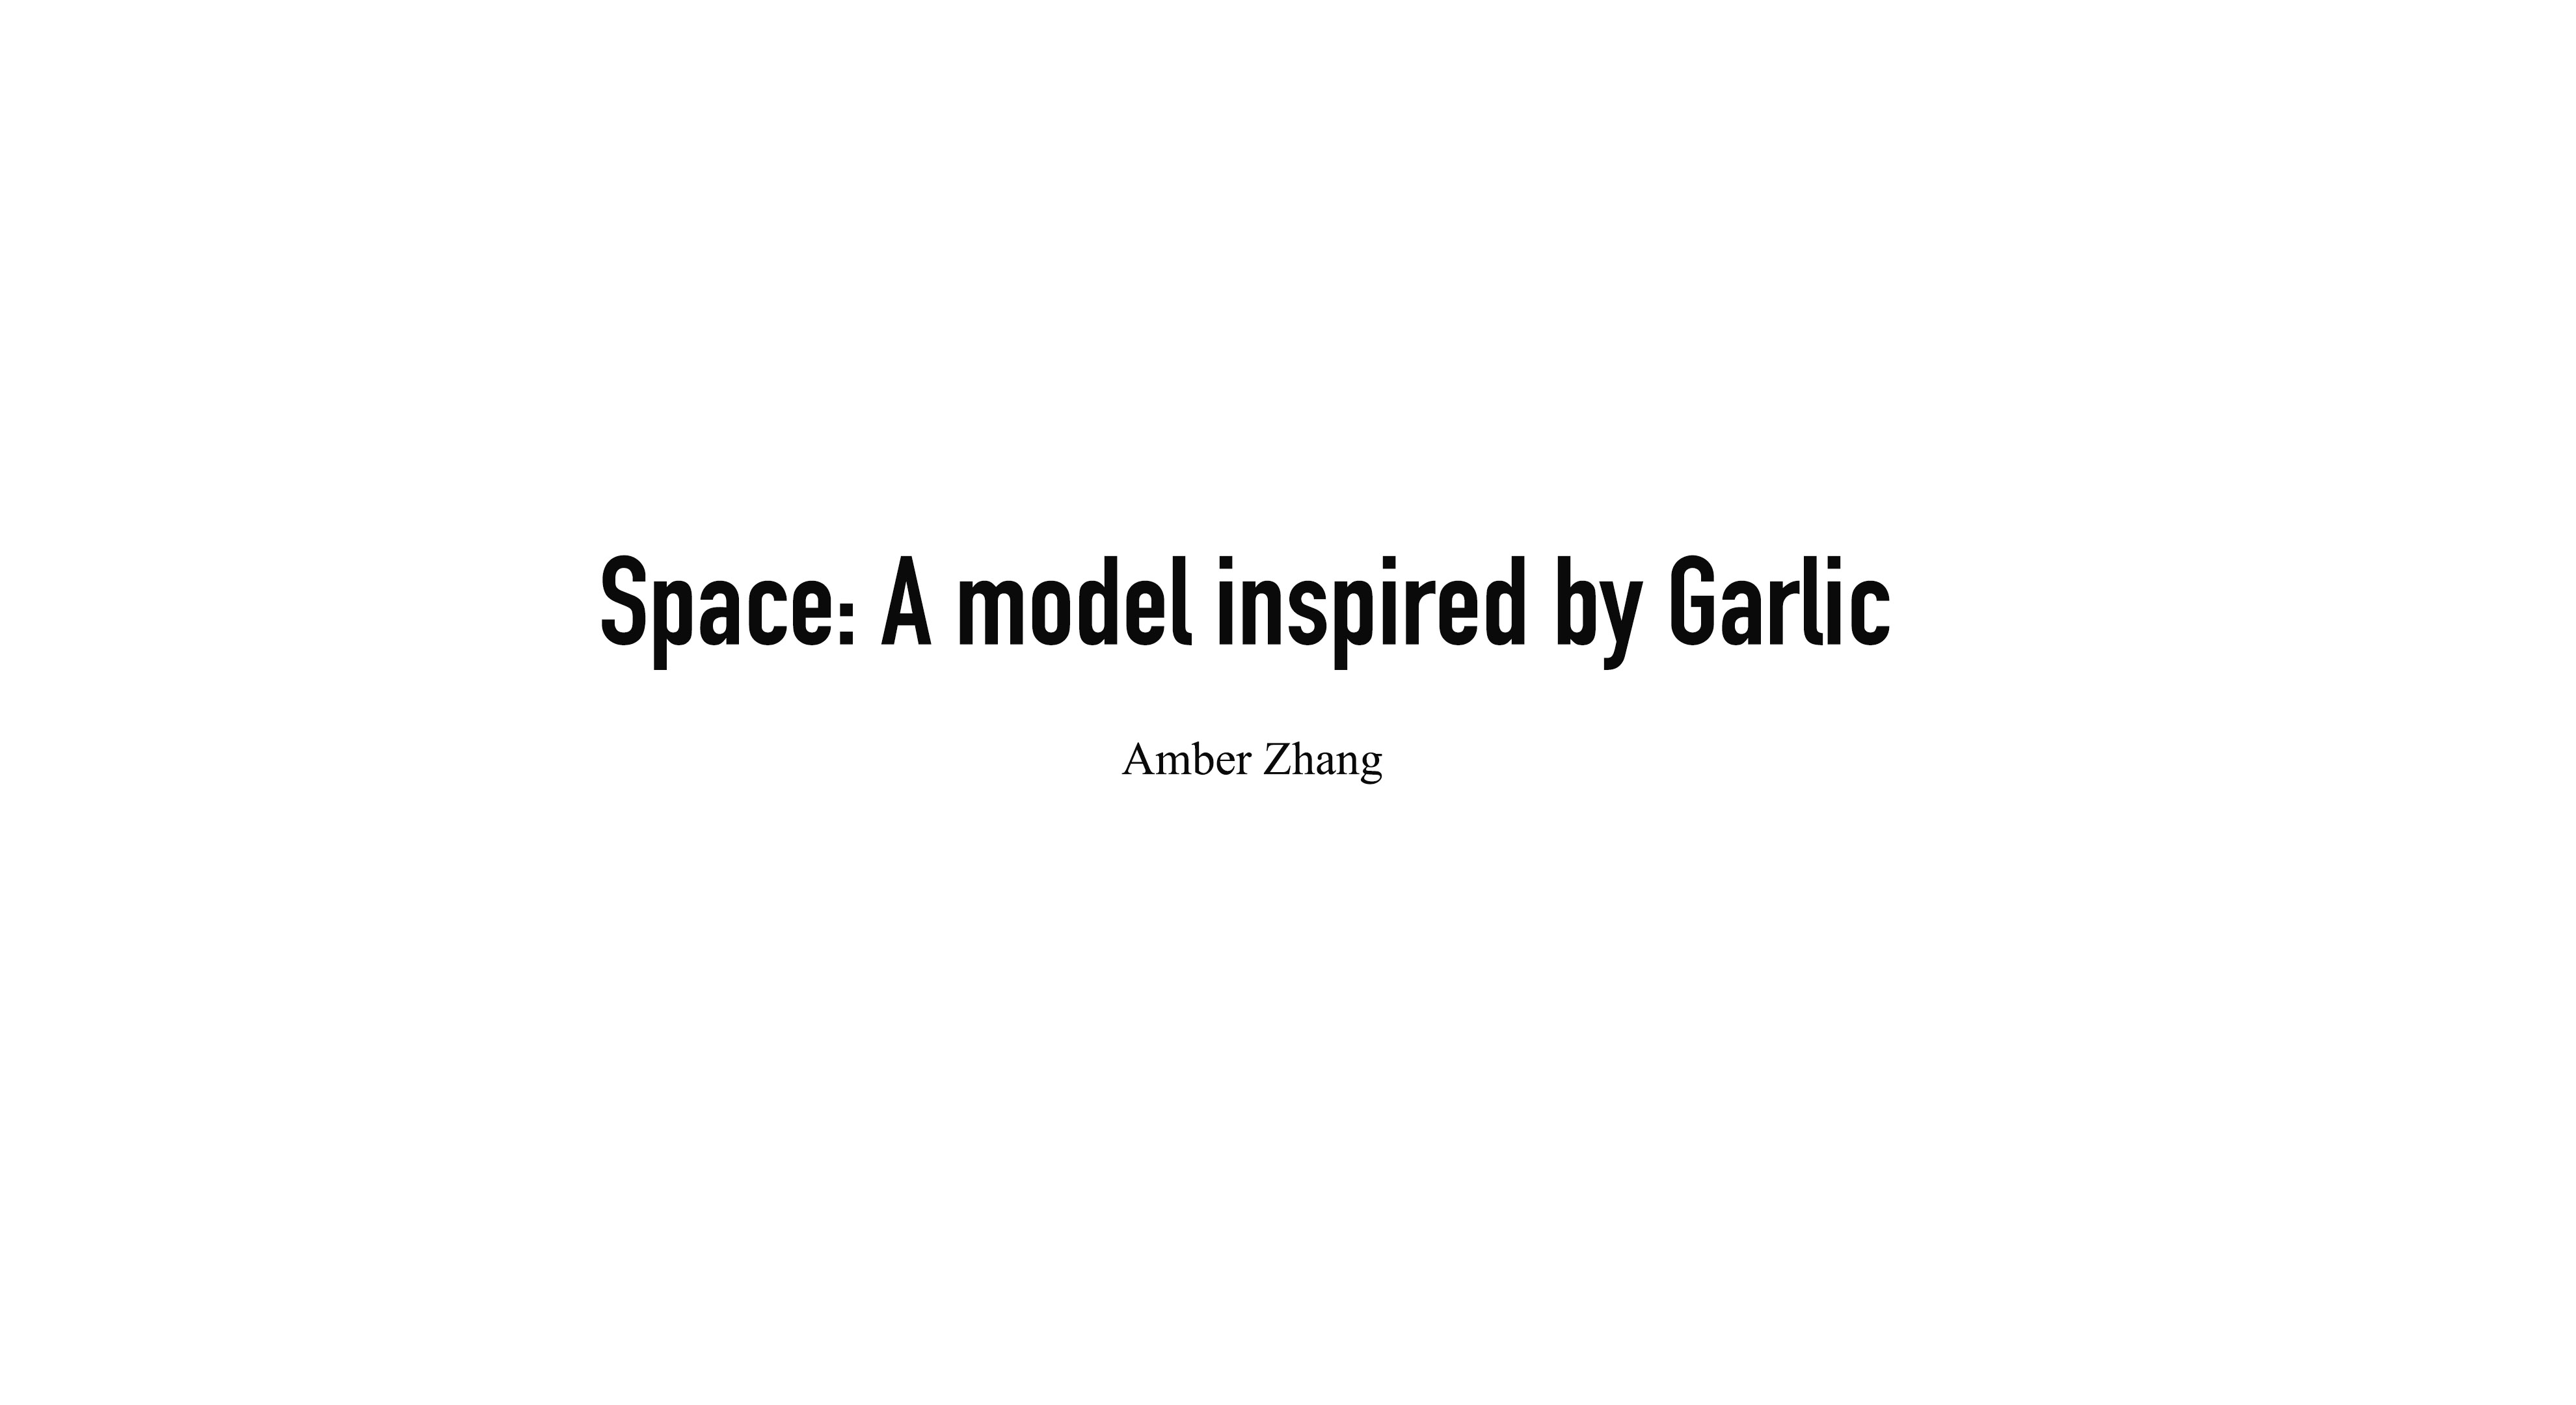 Space: A Model Inspired by Garlic